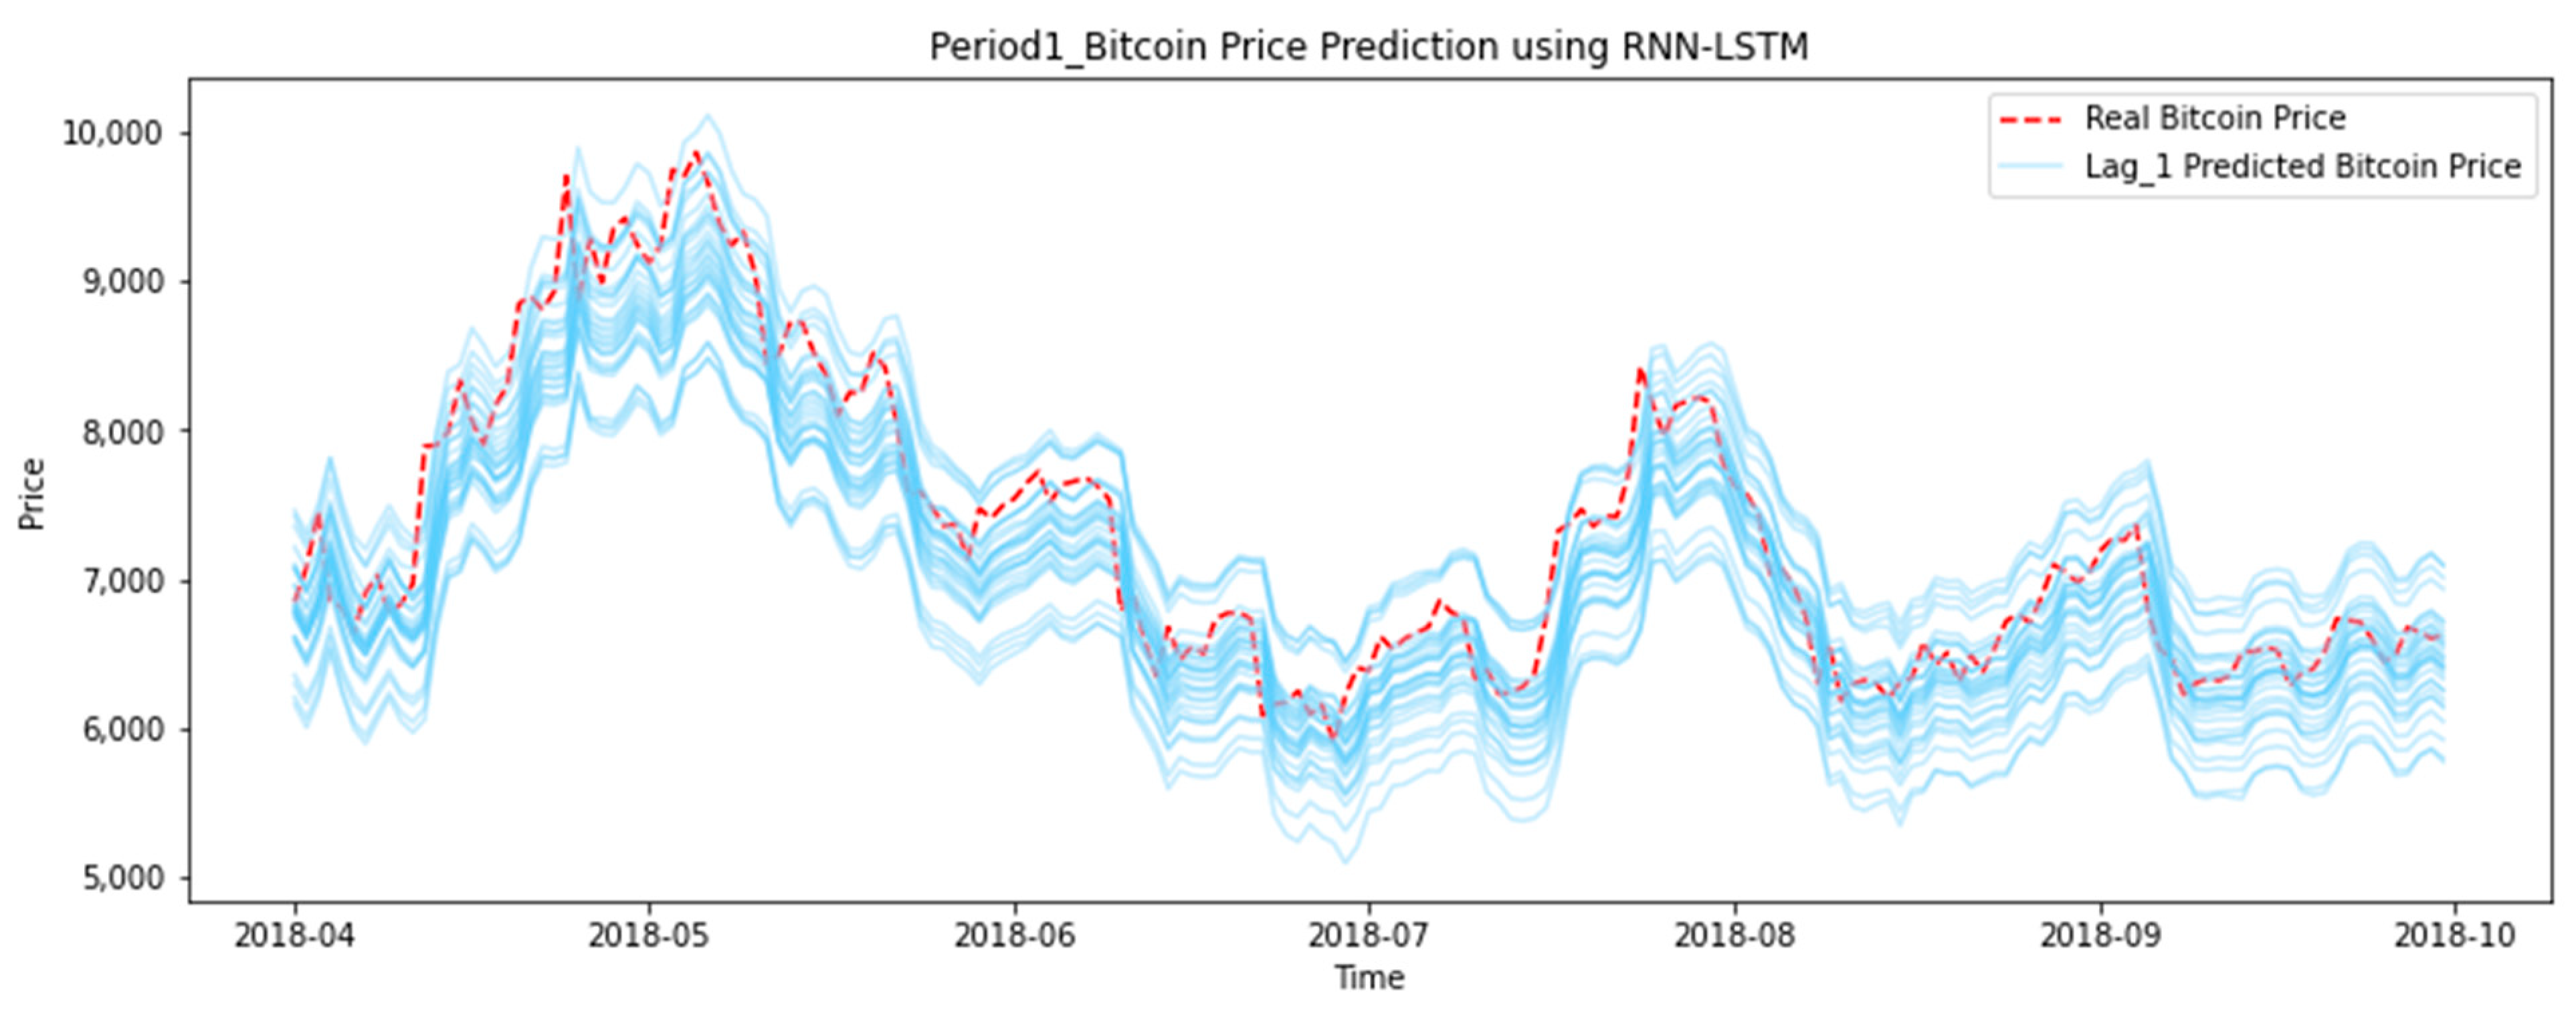 Trading Bitcoins and Online Time Series Prediction